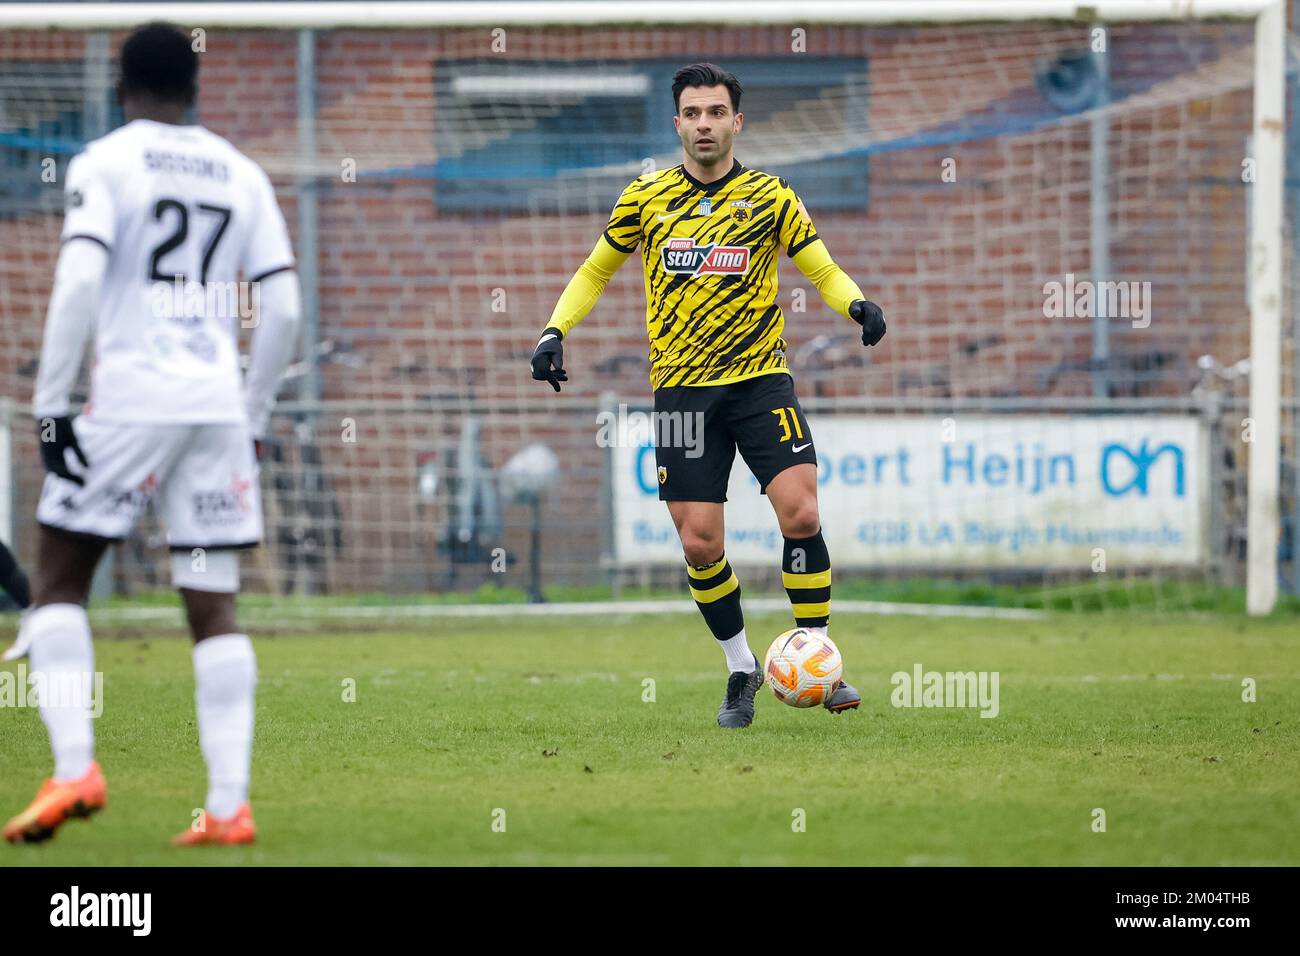 BURGH-HAAMSTEDE, NETHERLANDS - DECEMBER 4: Giorgos Tzavelas of AEK Athens during the Friendly match between AEK Athens and RFC Seraing at Sportpark van Zuijen on December 4, 2022 in Burgh-Haamstede, Netherlands (Photo by Broer van den Boom/Orange Pictures) Stock Photo